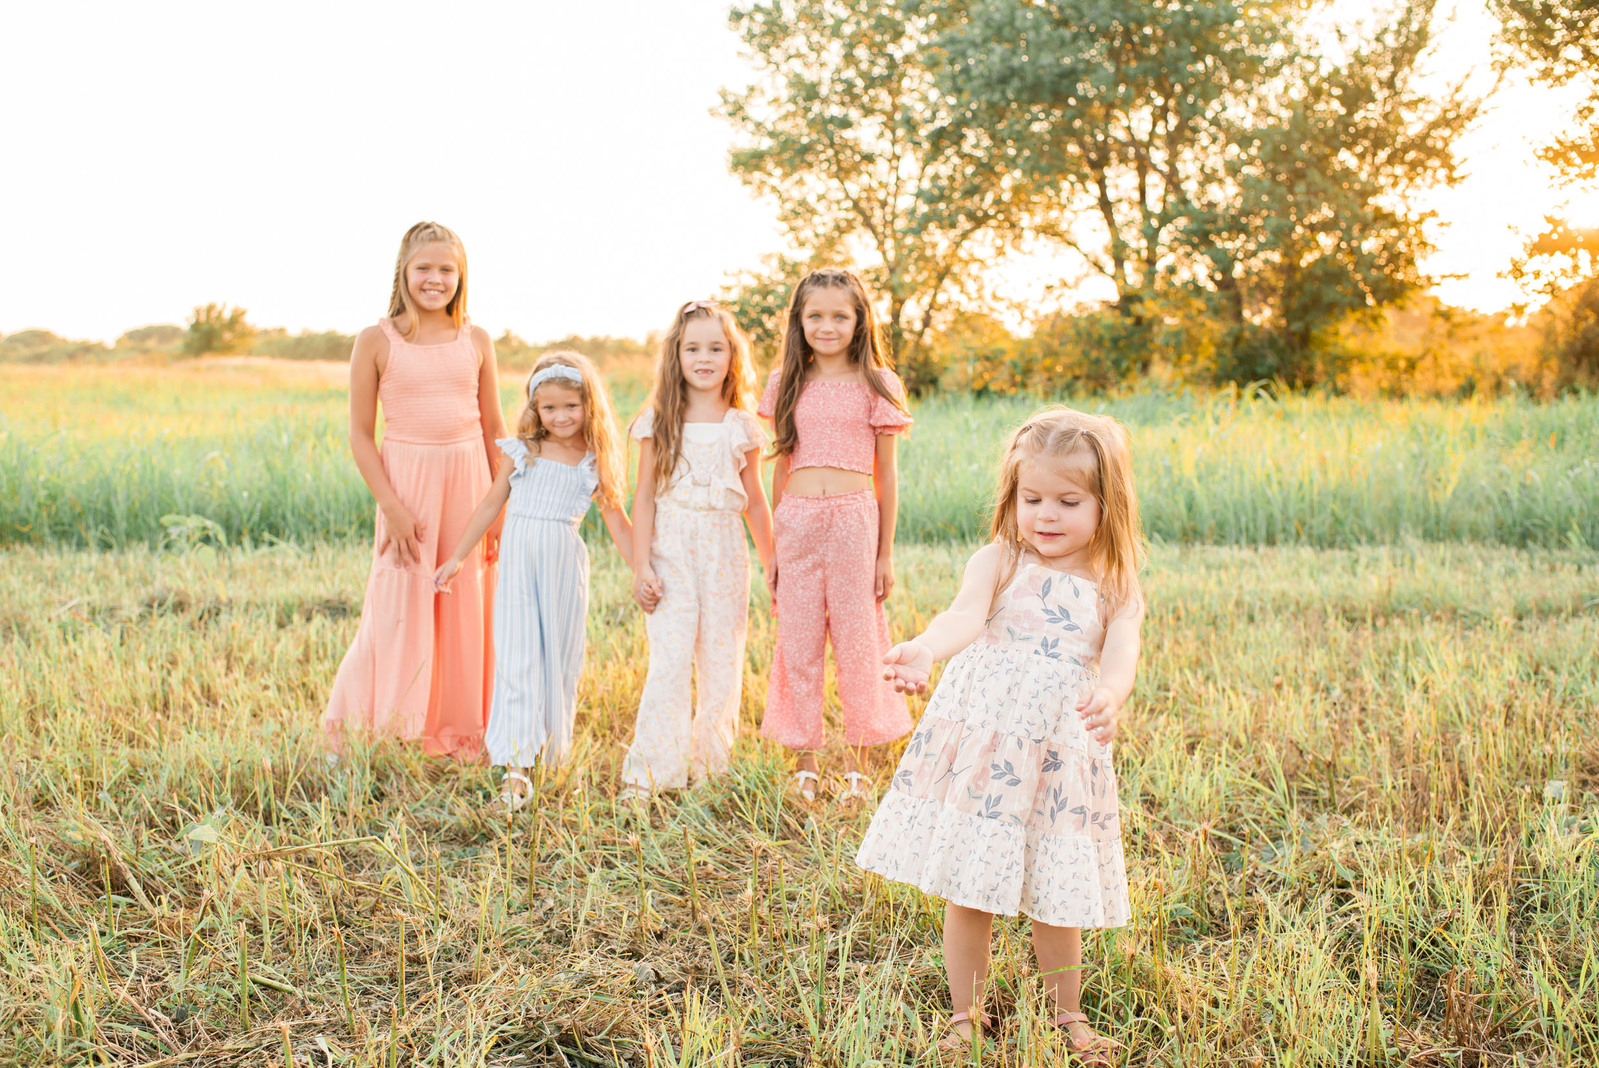 4 little girls are standing and holding hands wearing light colored rompers and a 5th toddler wearing a dress is in the foreground pointing in a field in central Oklahoma at sunset